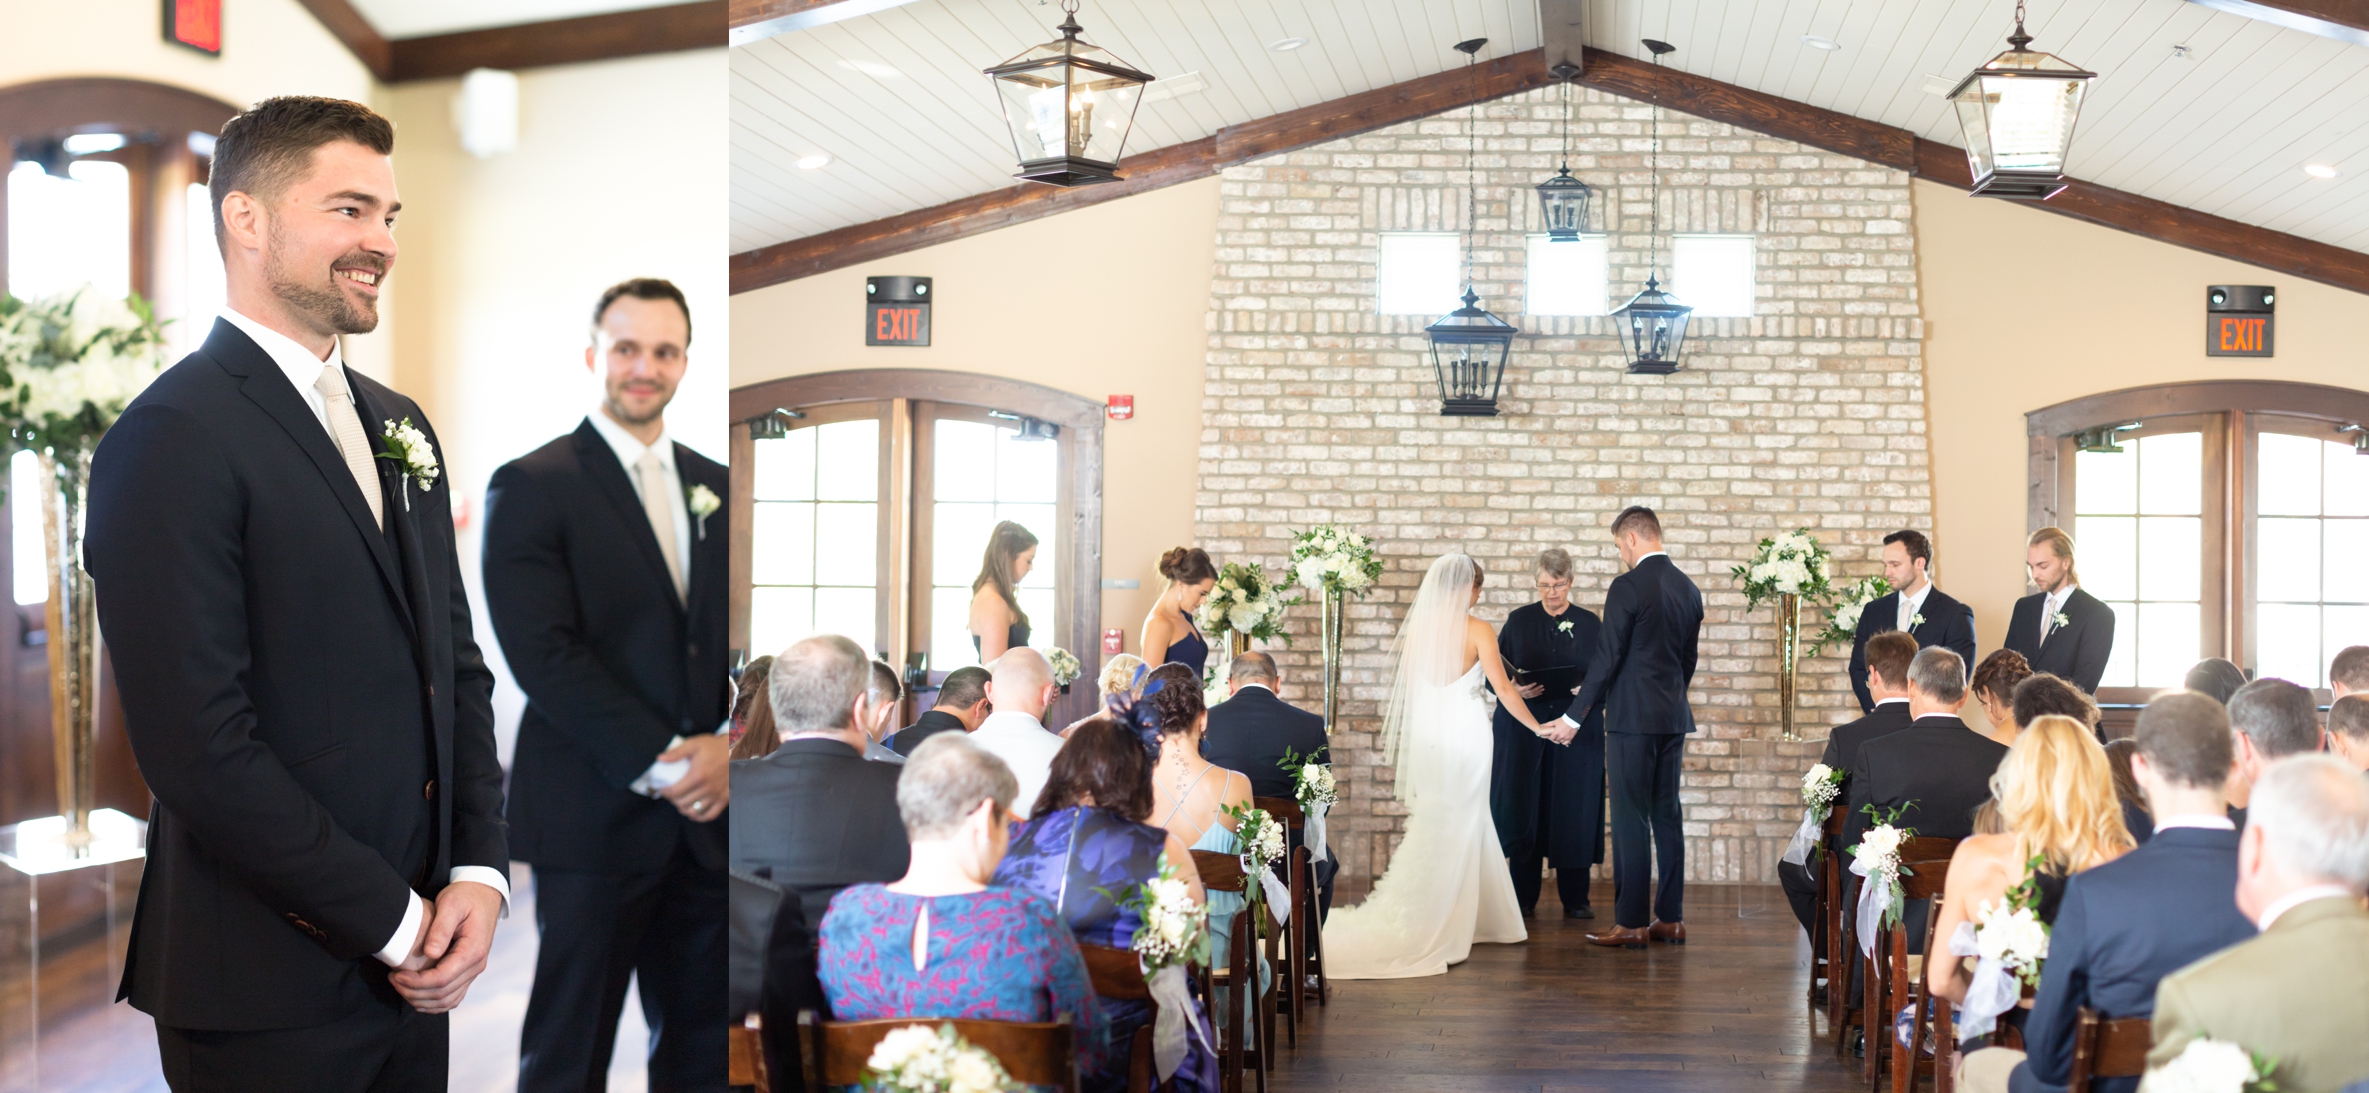 Ceremony at Manor House Banquet Center, Carriage house wedding